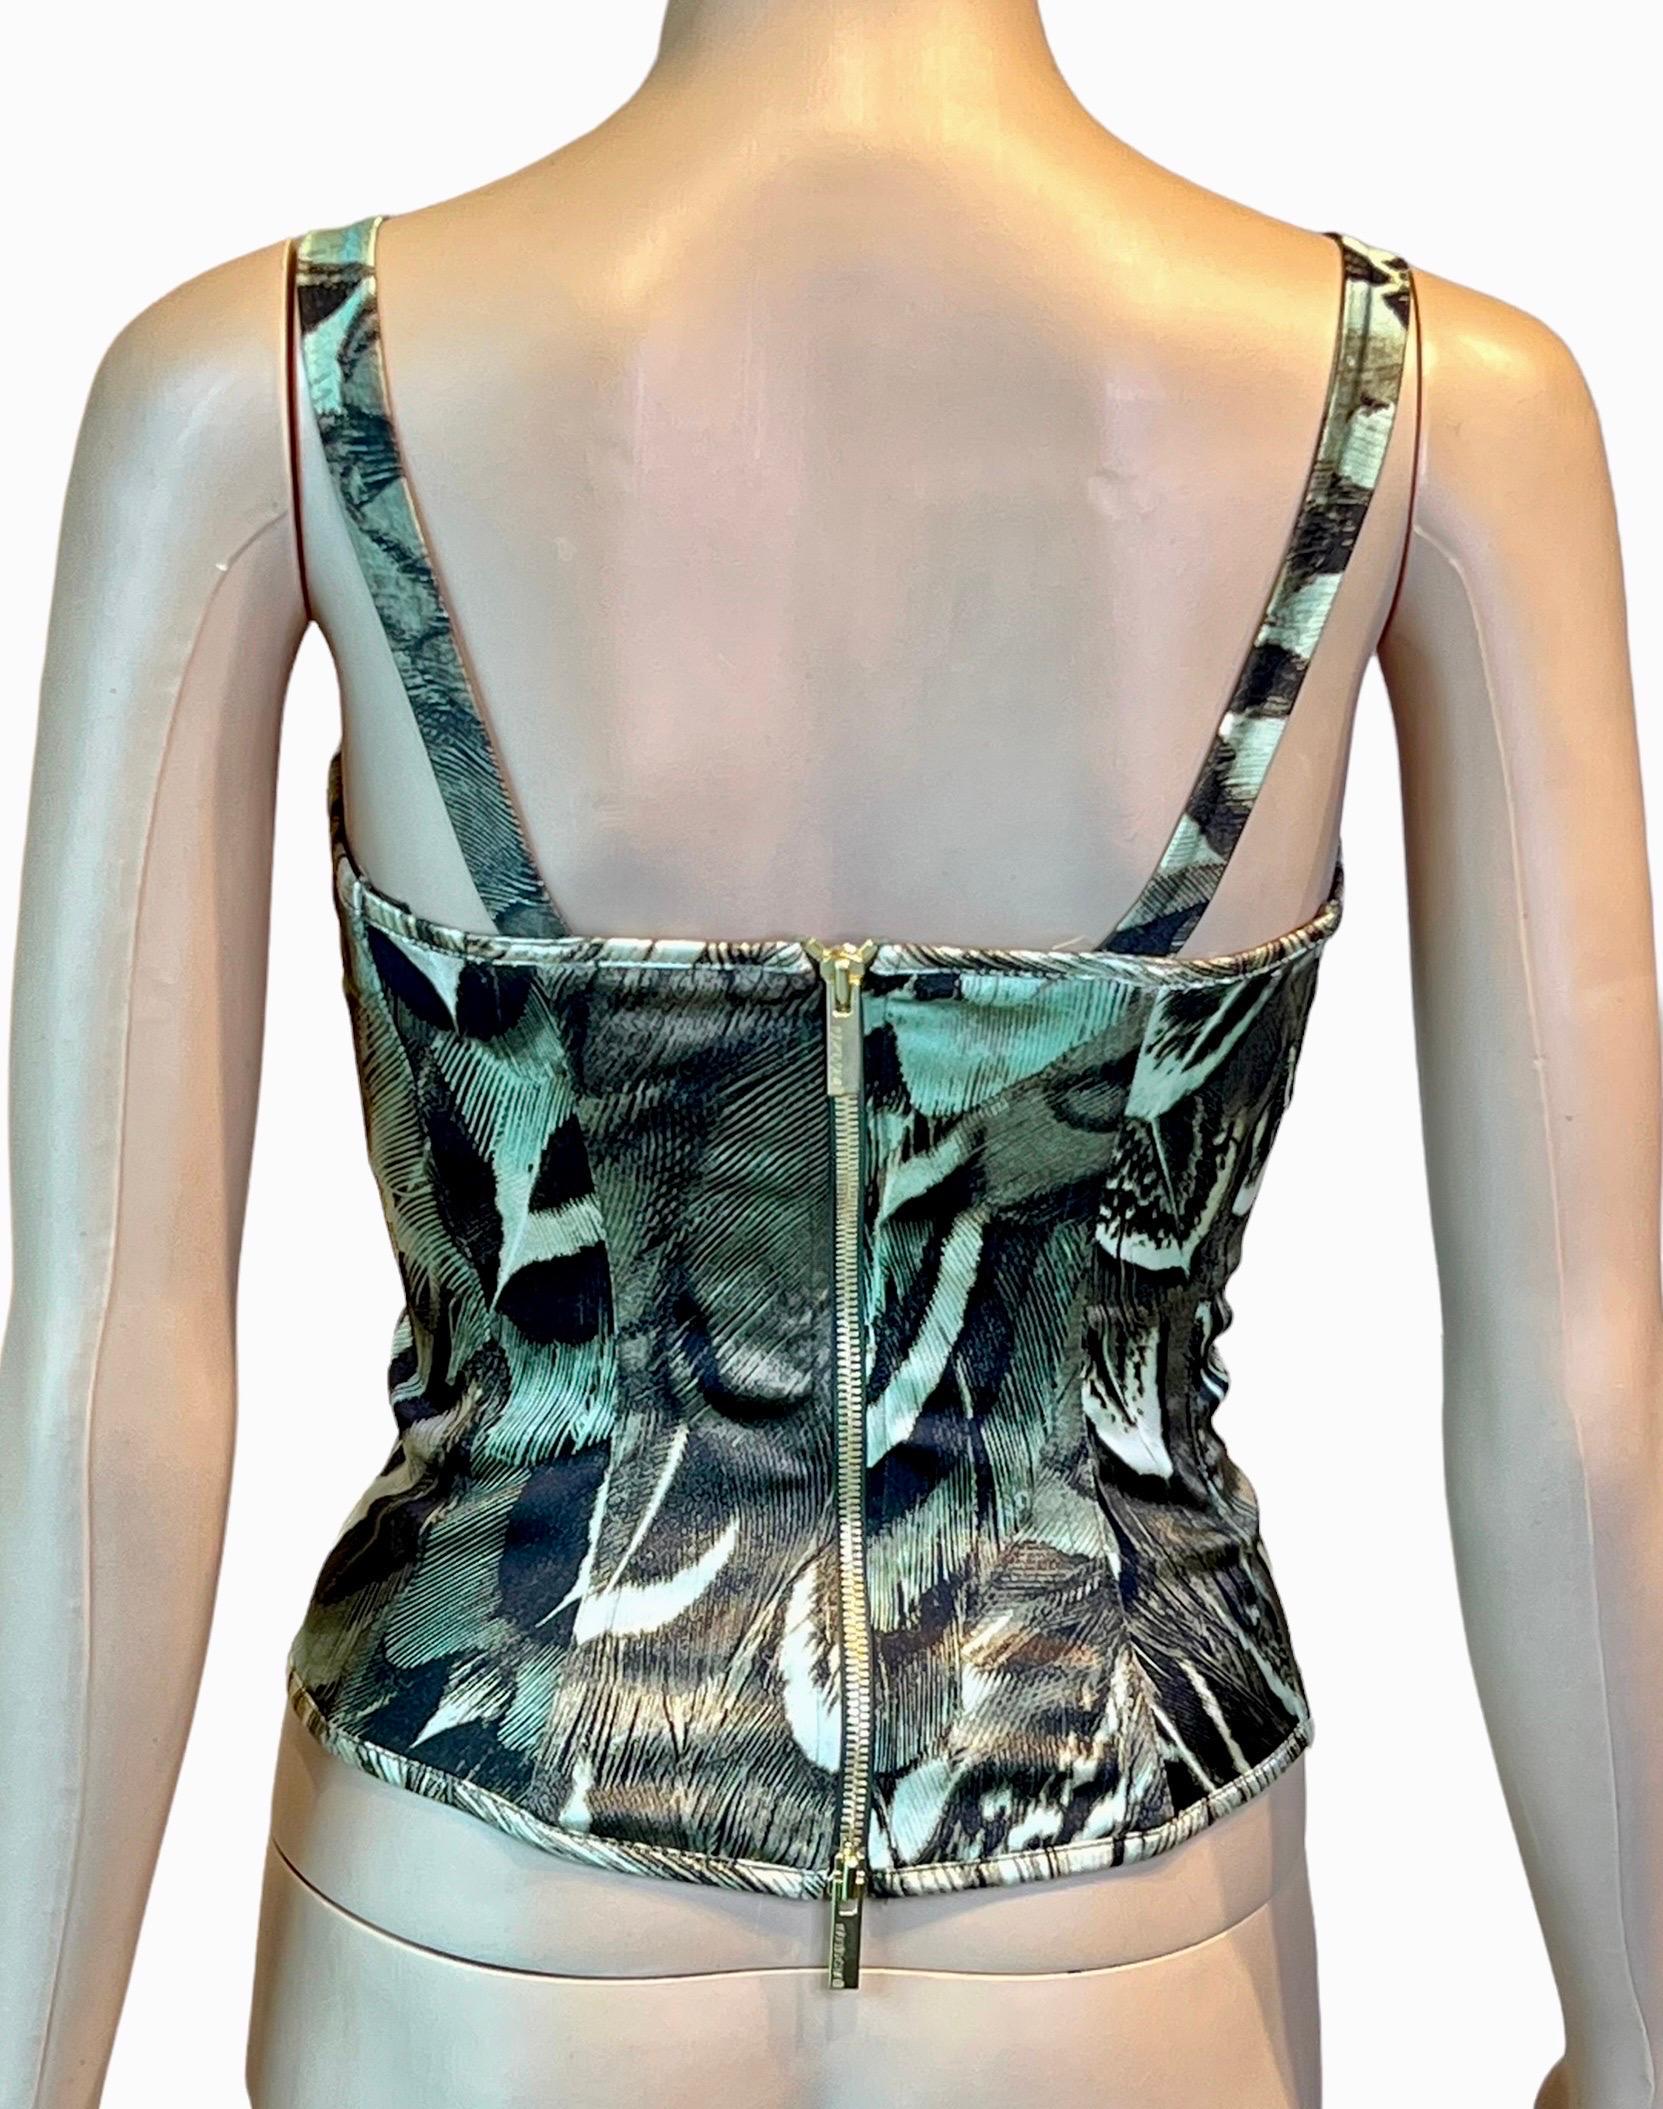 Roberto Cavalli S/S 2005 Bustier Corset Silk Abstract Print Crop Top In Excellent Condition For Sale In Naples, FL